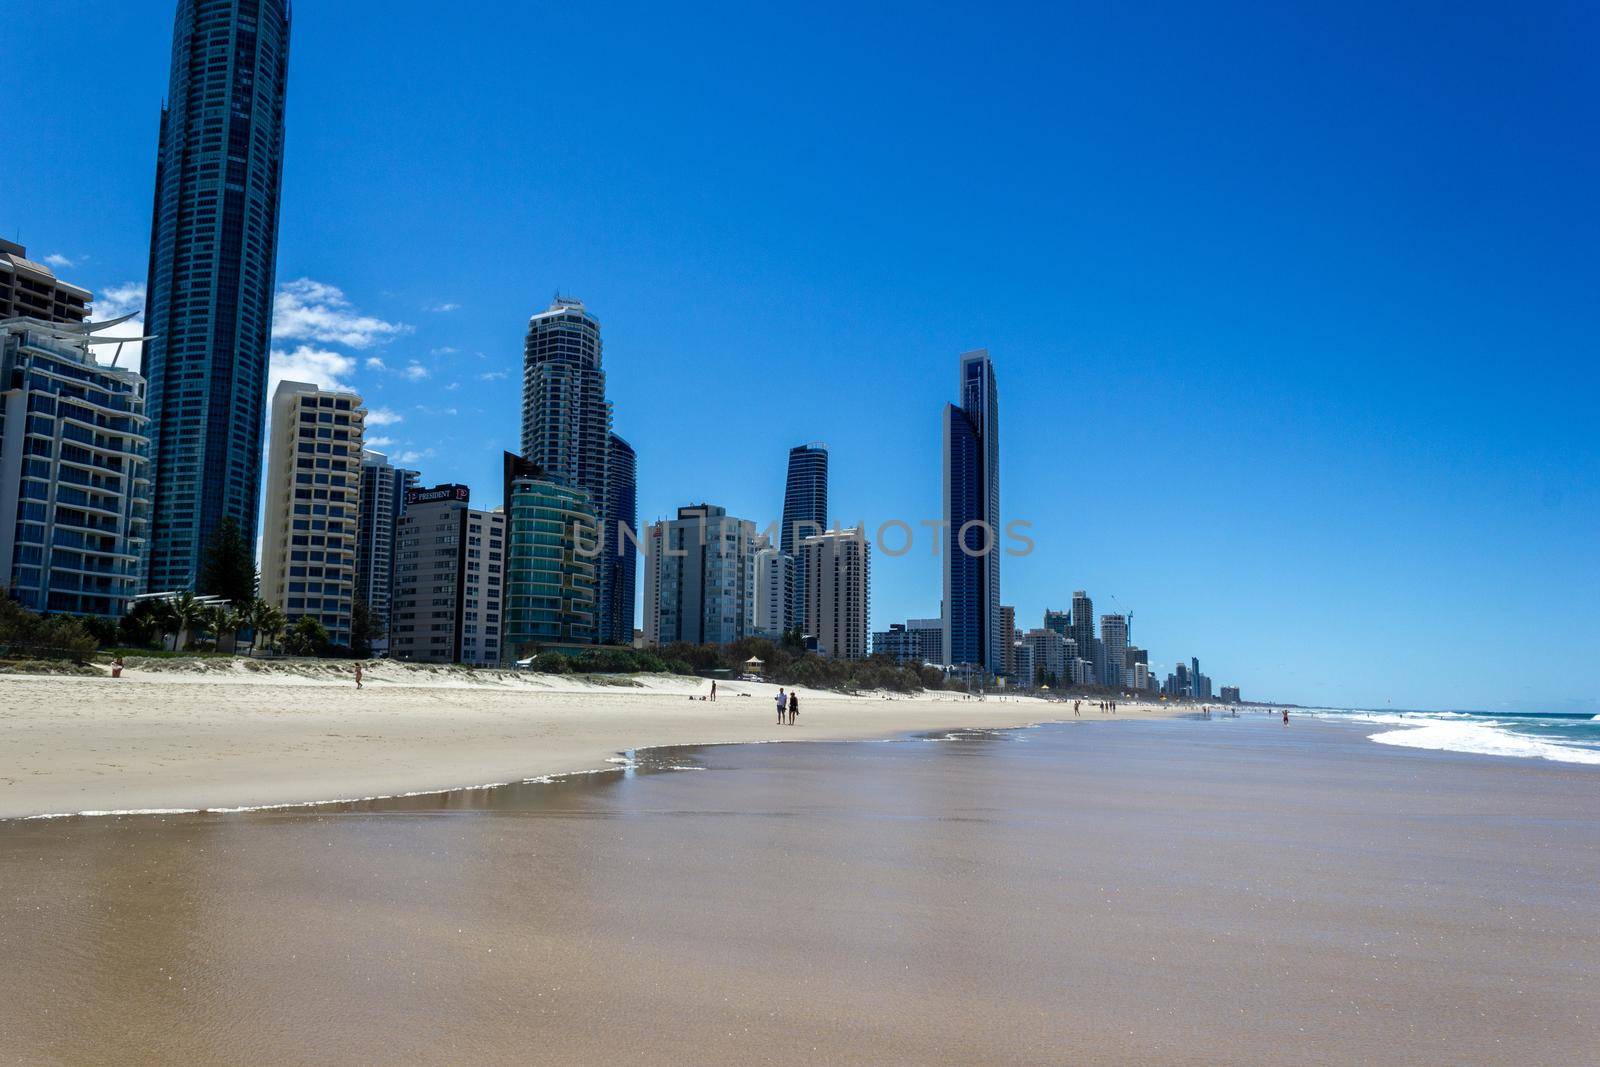 Sunny day in Surfers Paradise beach, Gold Coast, Queensland, Australien. by bettercallcurry